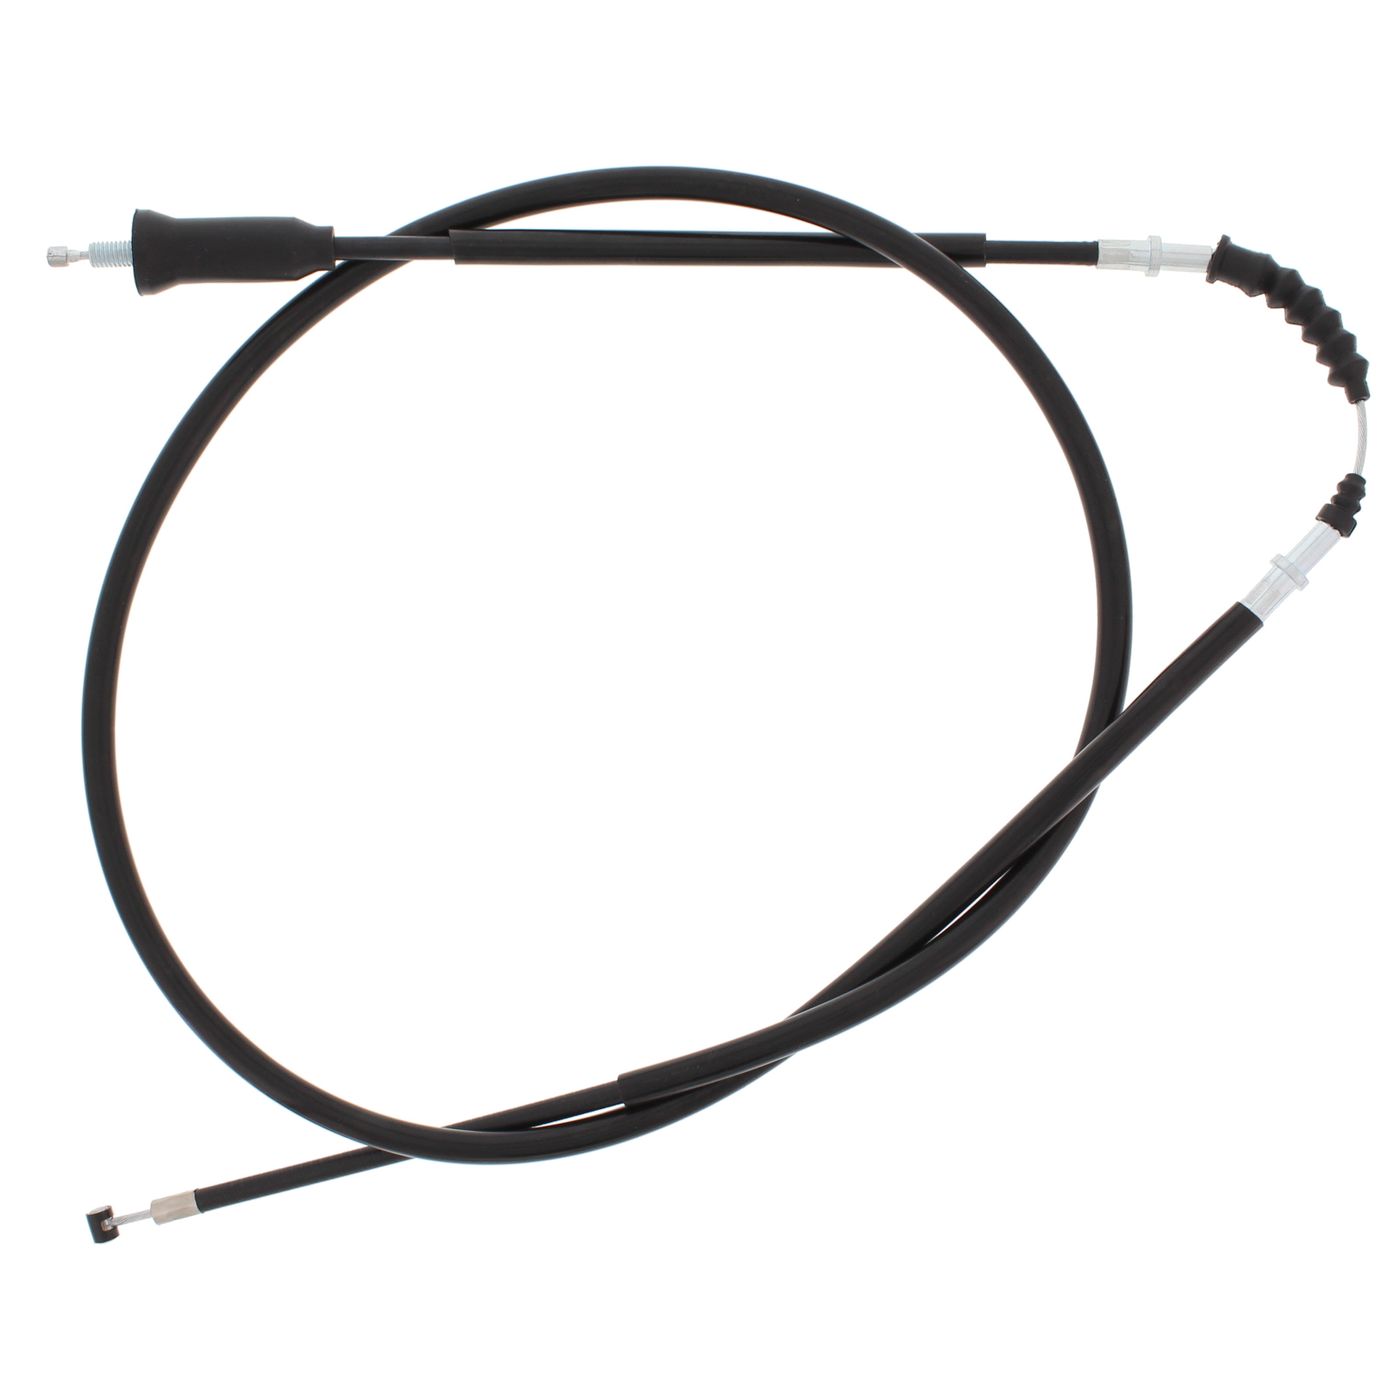 Wrp Brake Cables - WRP454050 image